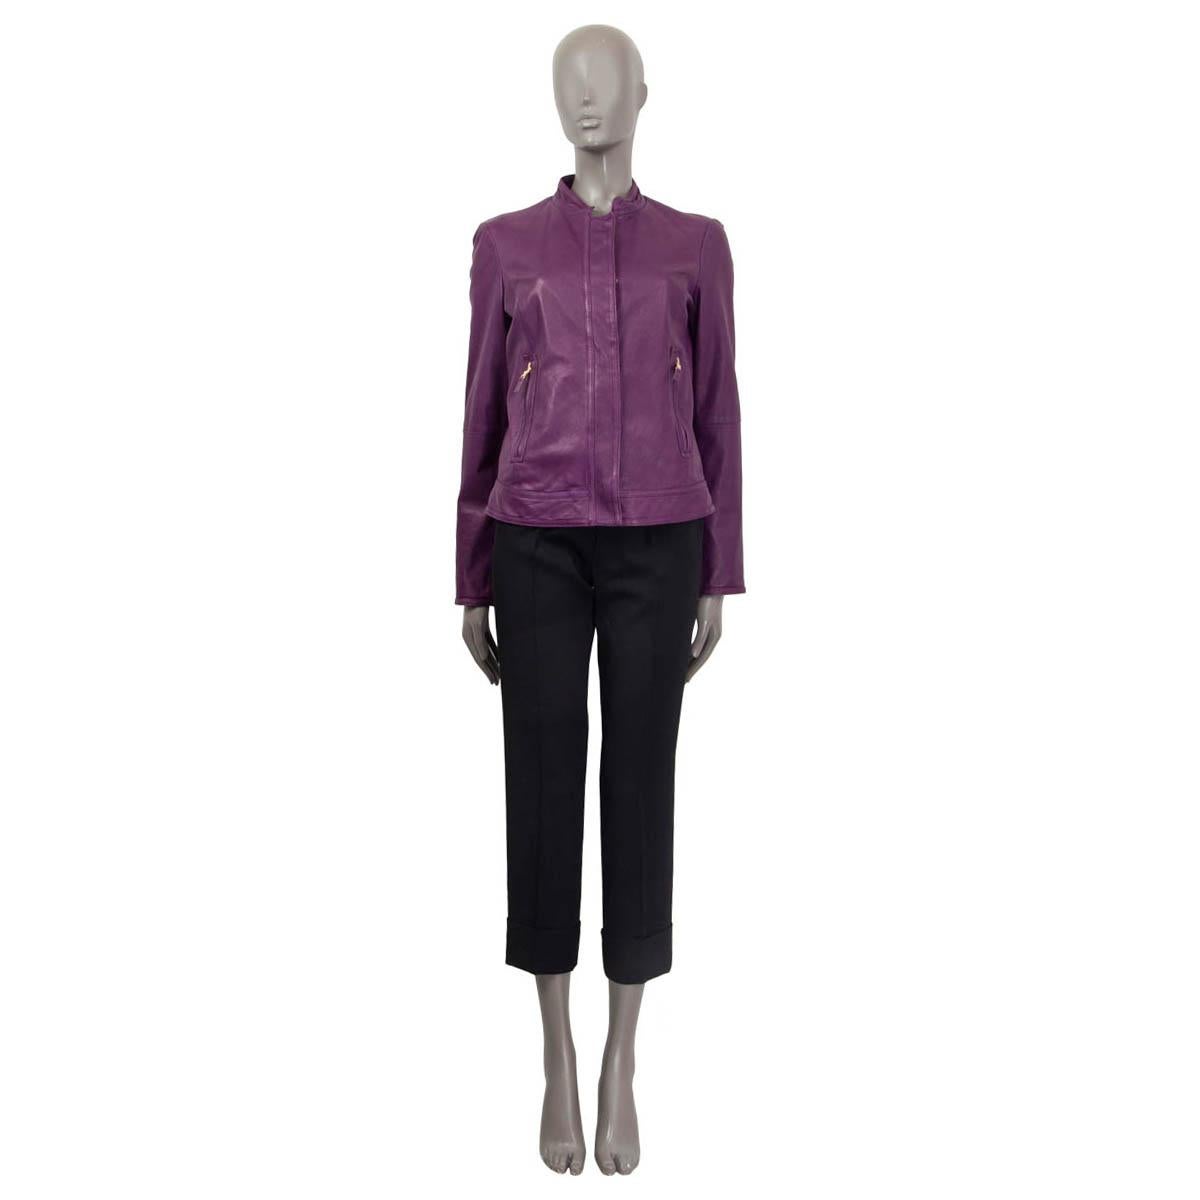 100% authentic Etro jacket in purple lamb leather (100%). Features two buttoned pockets on the front, zipped cuffs and a stand-up collar. Opens with a concealed zipper and five push buttons on the front. Lined in multicolored viscose (100%). Has